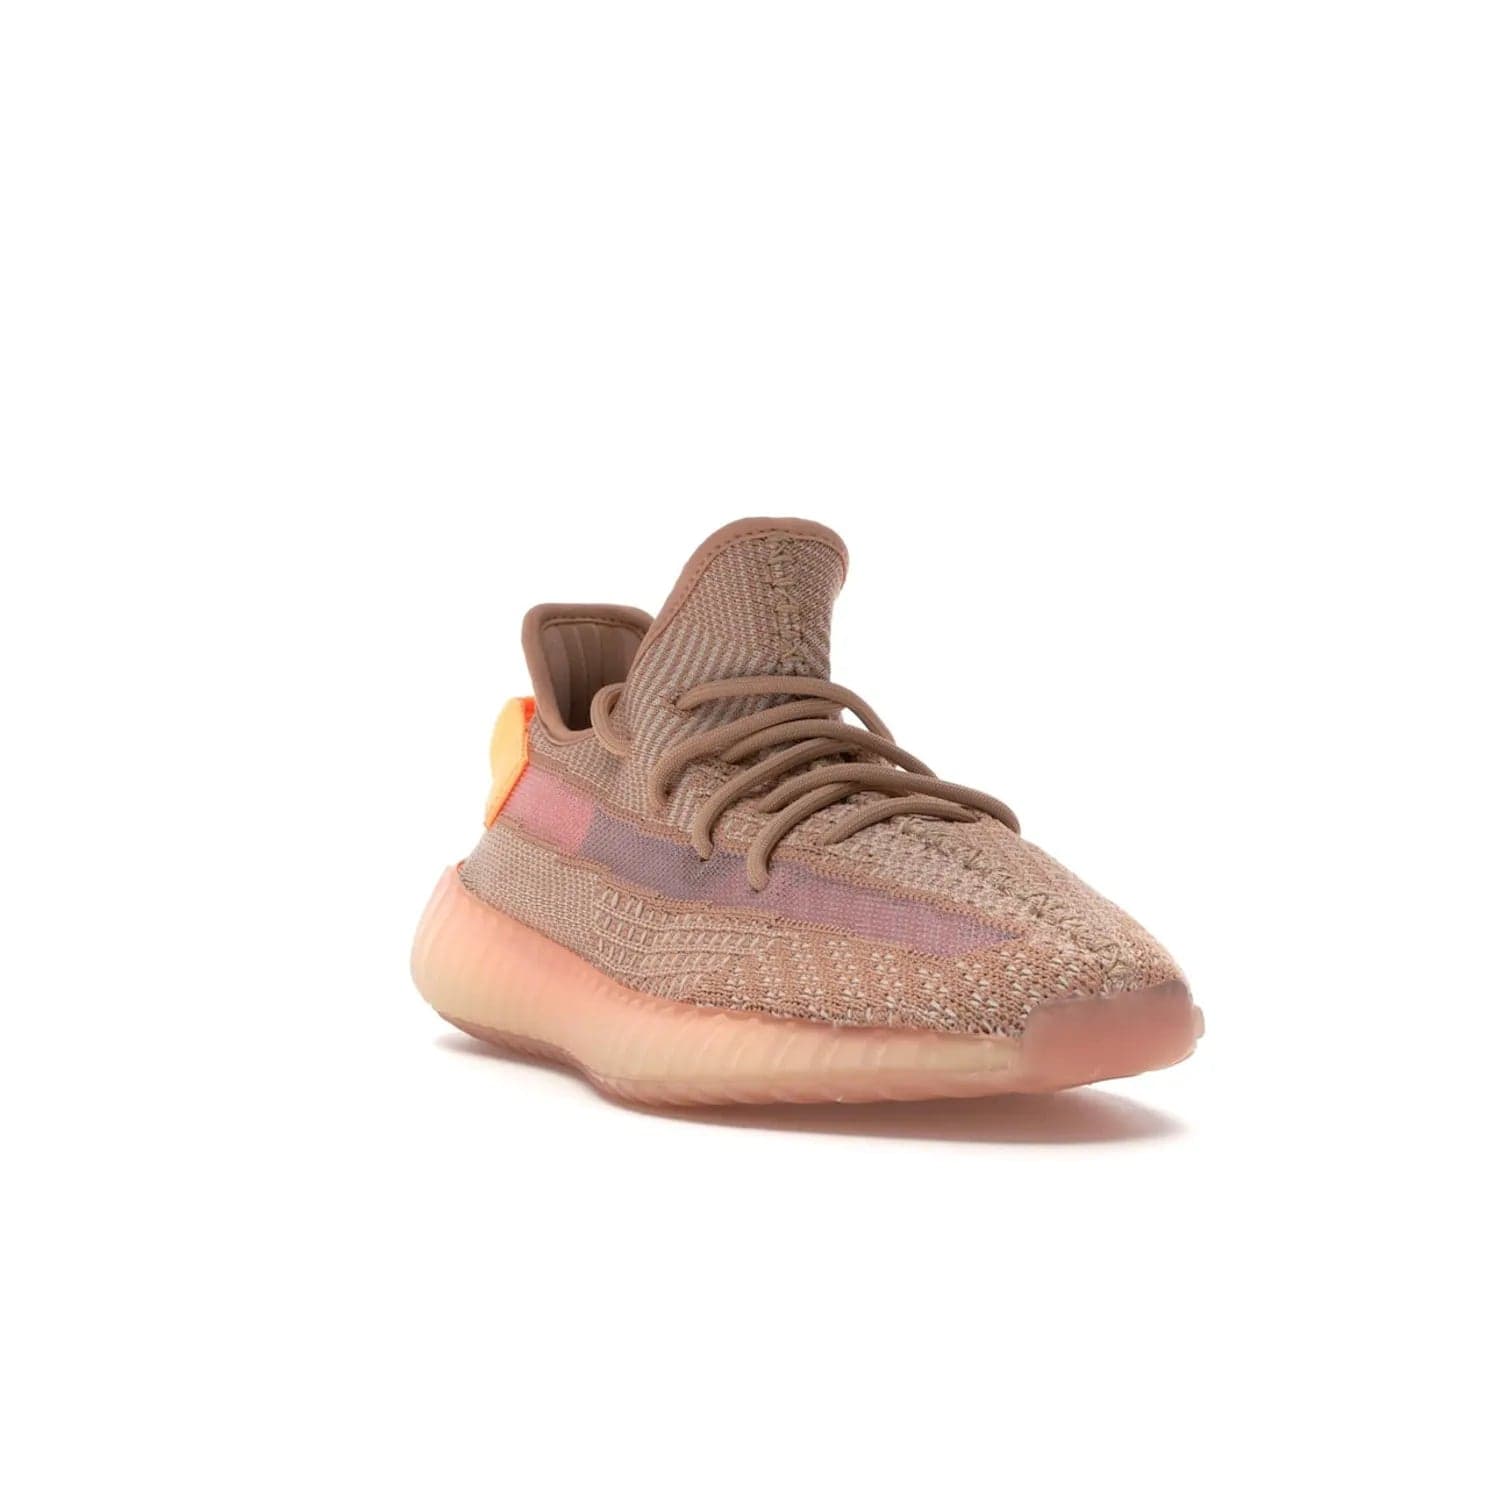 adidas Yeezy Boost 350 V2 Clay - Image 7 - Only at www.BallersClubKickz.com - The adidas Yeezy Boost 350 V2 Clay - style and swag in one shoe. Orange accents, clay midsole and sole. Get yours today!